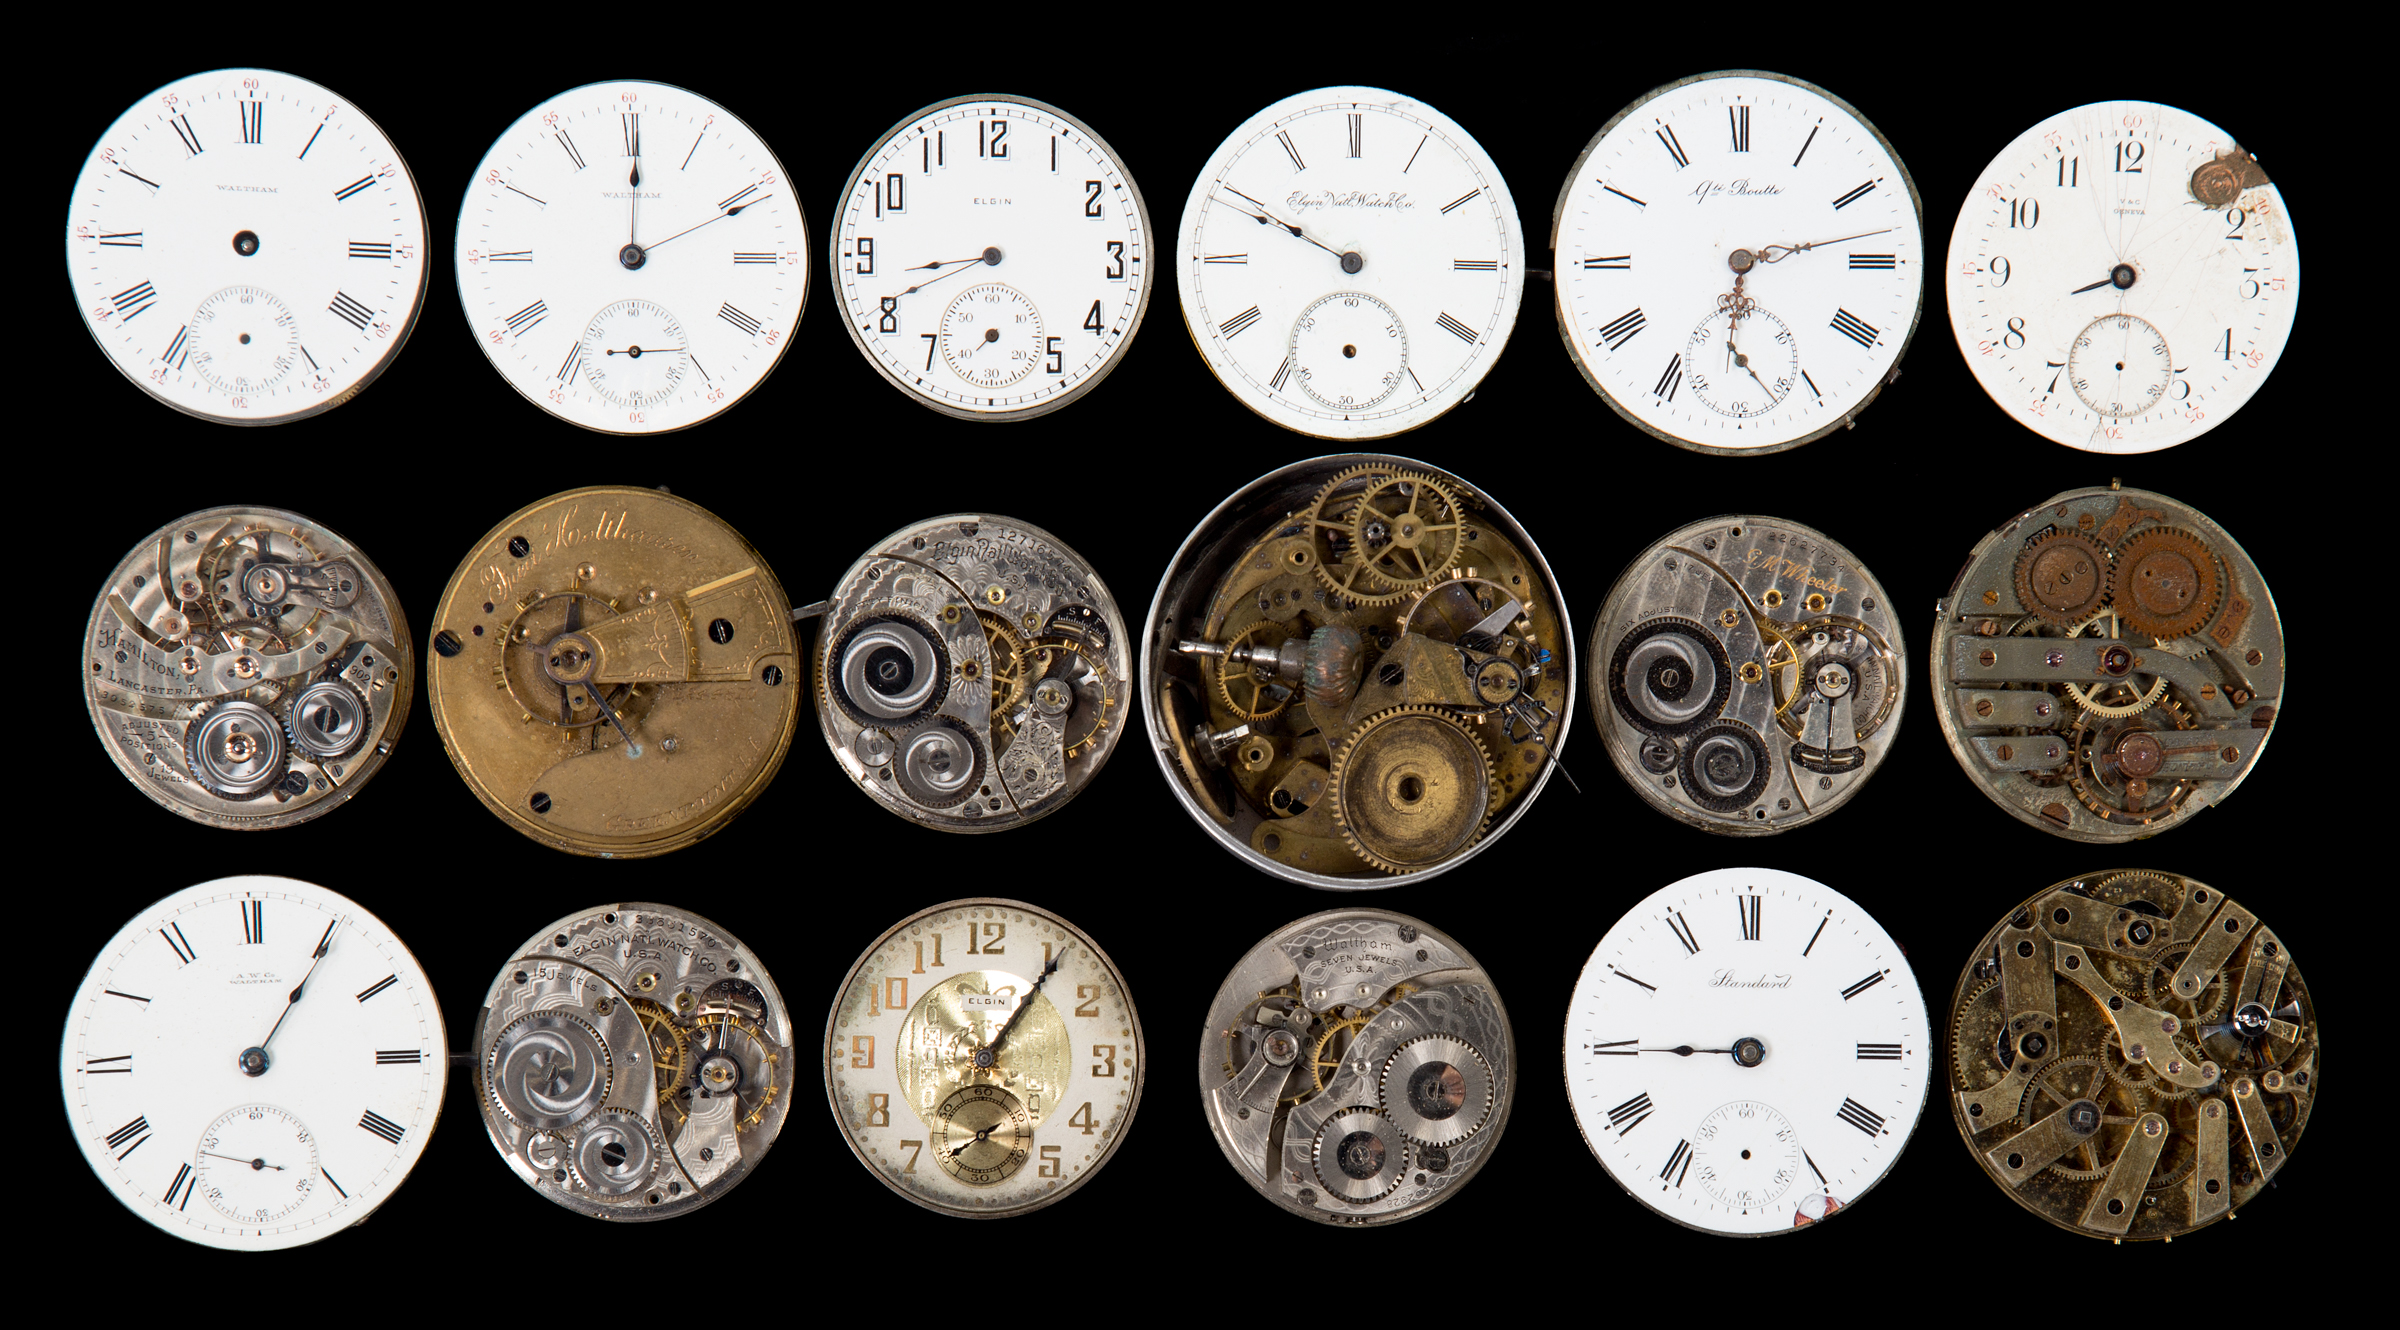 The Pocket Watch Movement